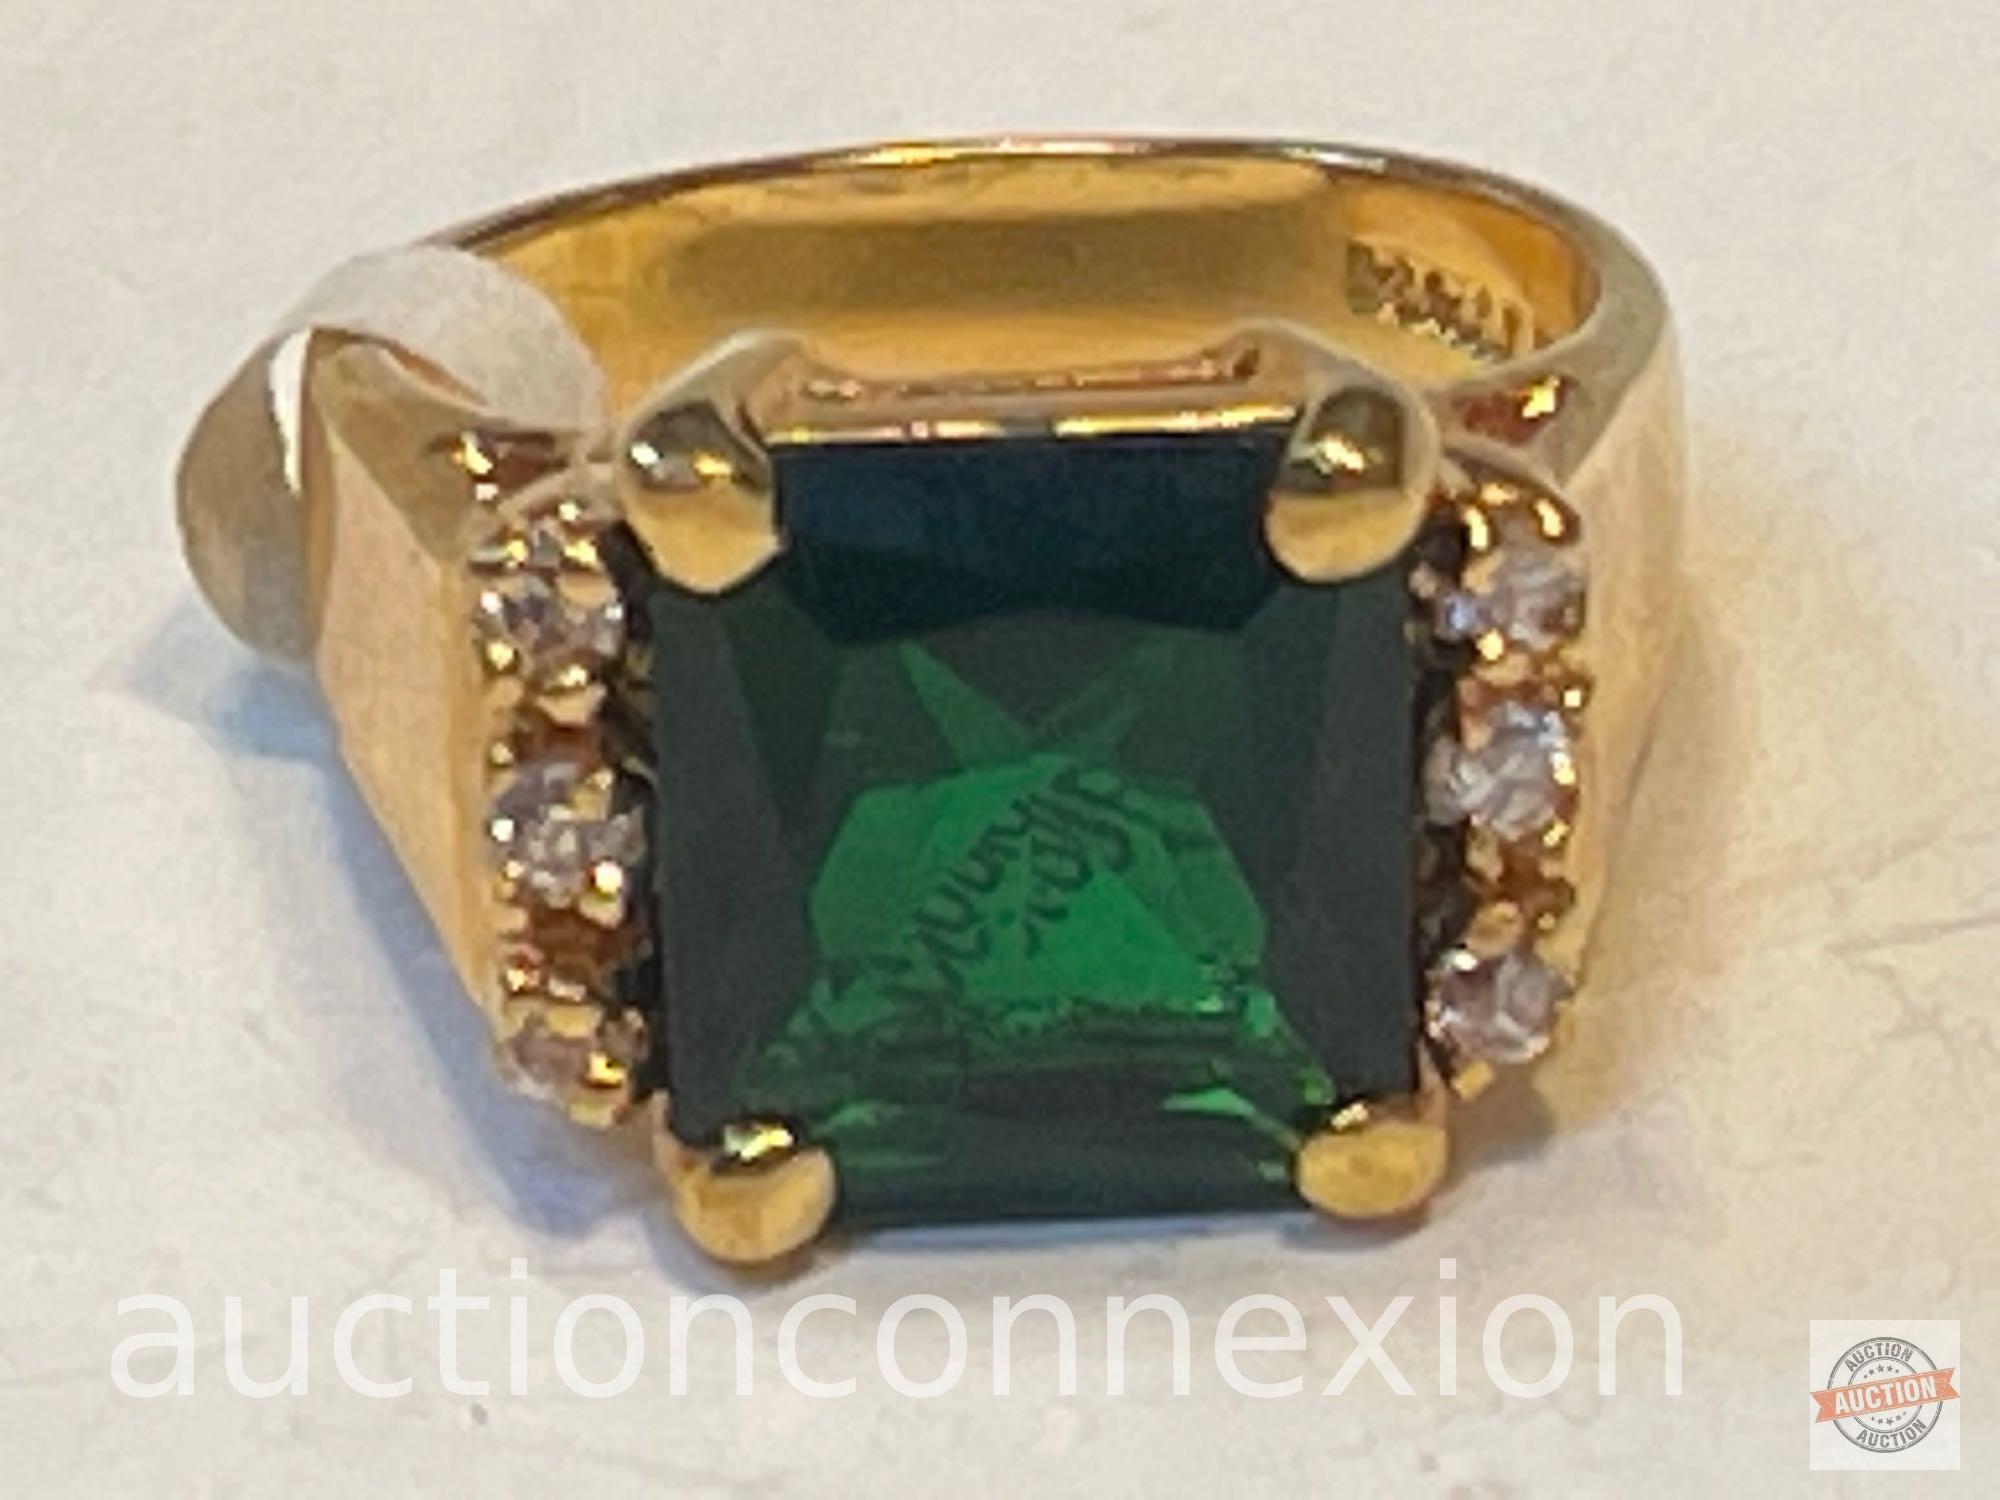 Jewelry - Fashion Cocktail Ring, 14k gold electroplated cubic zirconia, Lg. green stone w/ 6 clear